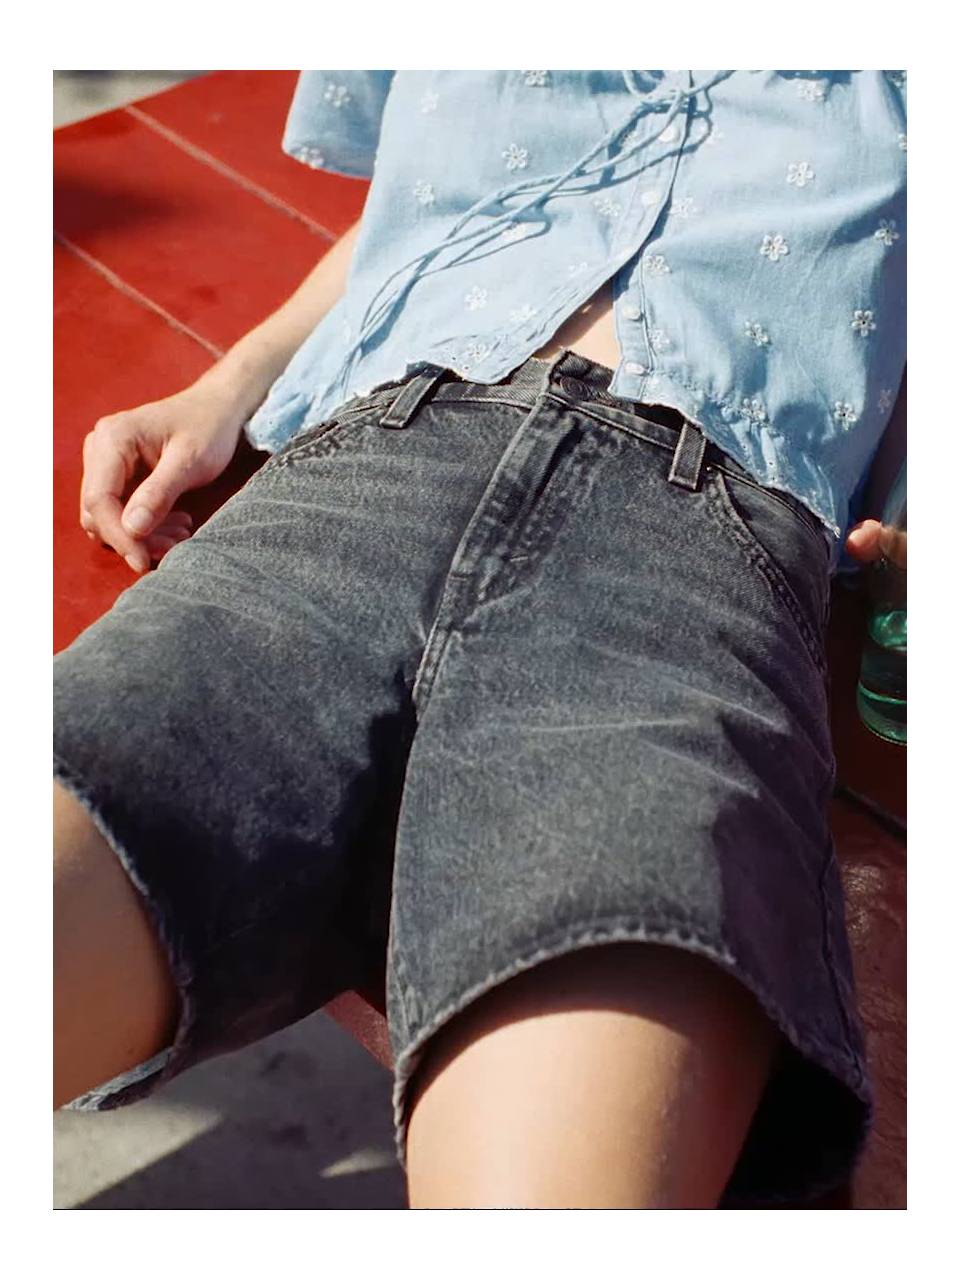 Image of model in Levi's shorts.